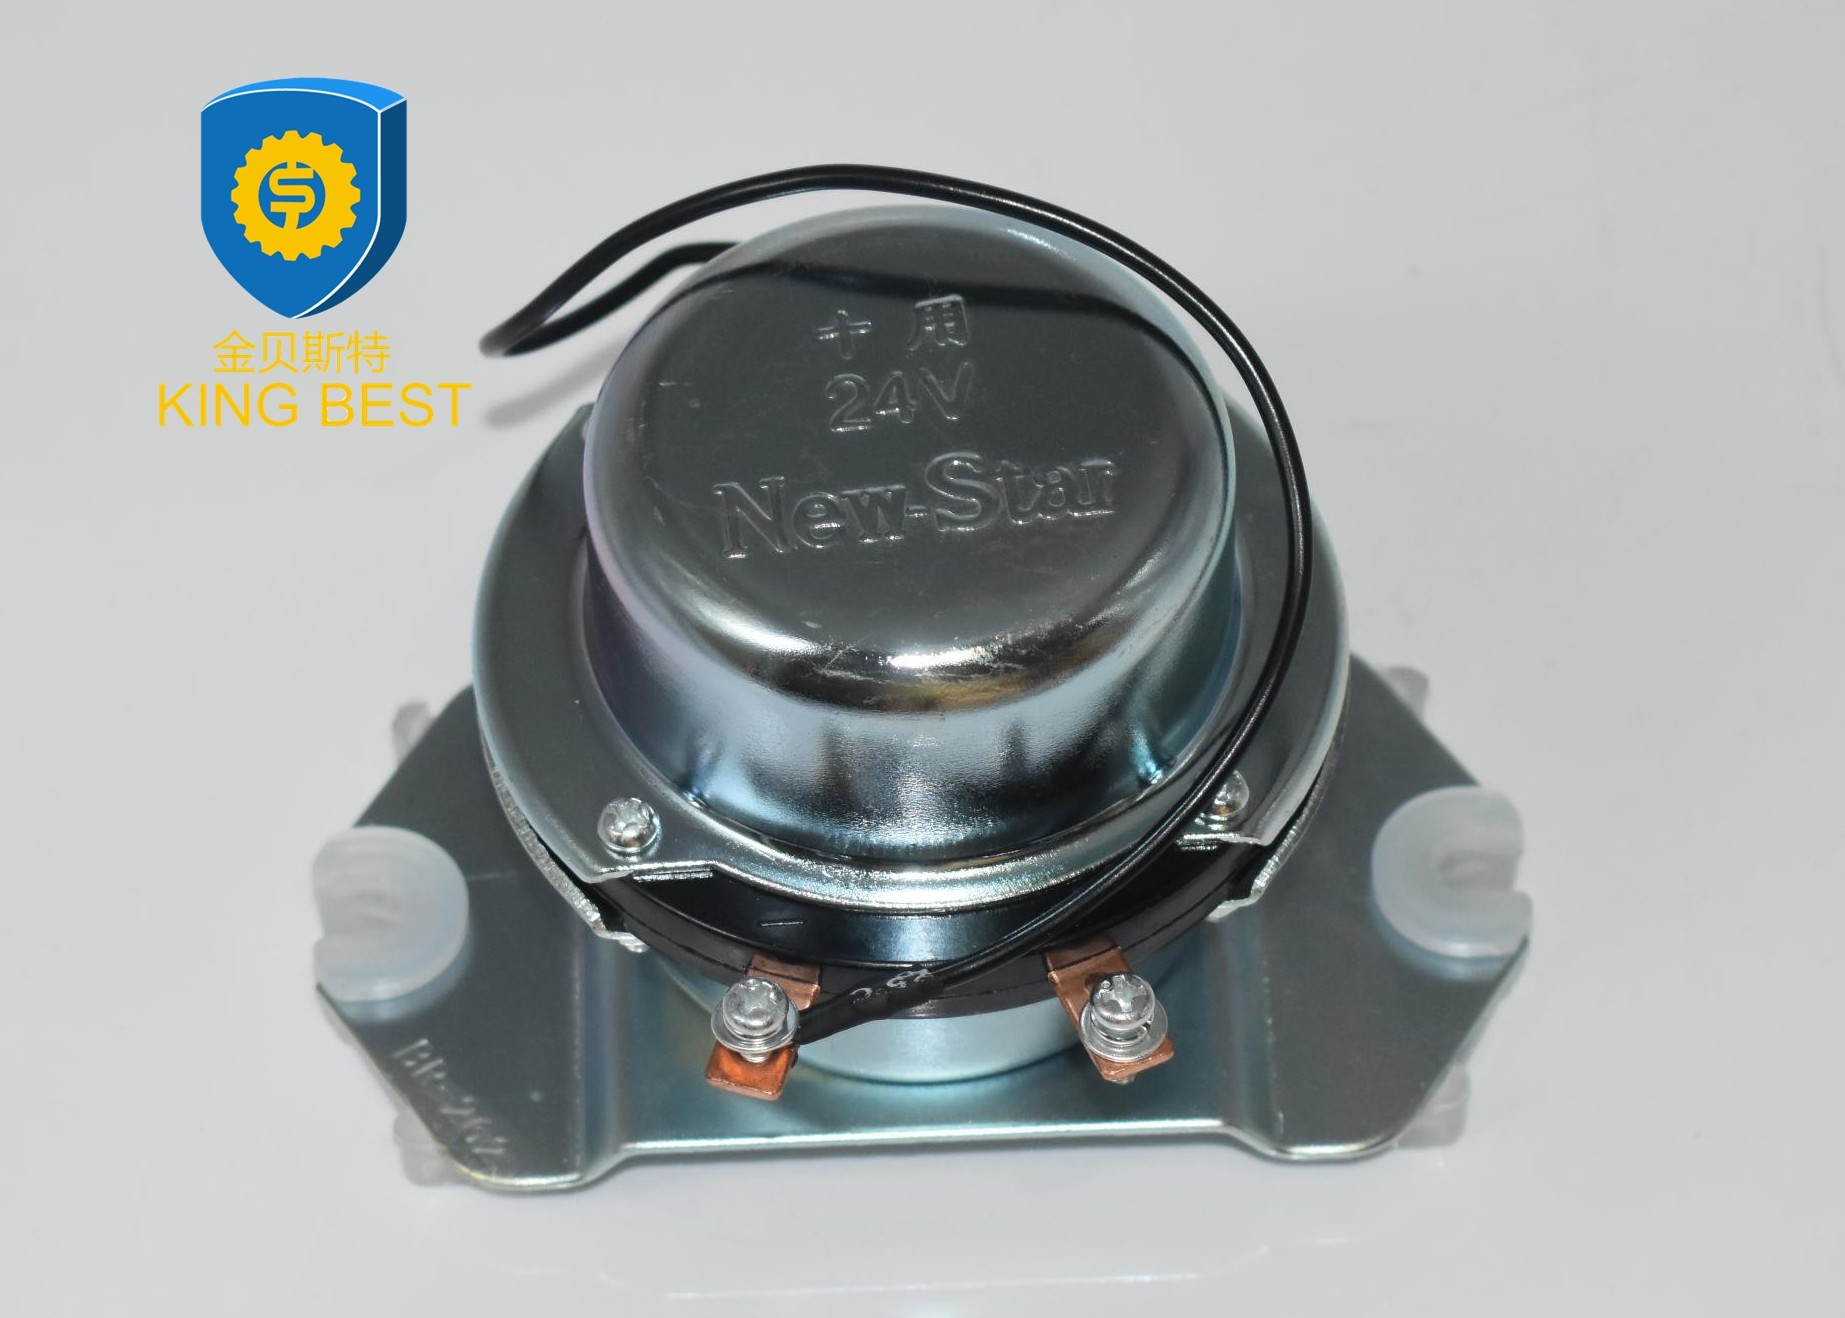 Quality 24V Komatsu Excavator Parts Battery Relay Switch 08088-30000  17A-06-11361  421-06-11930 for sale